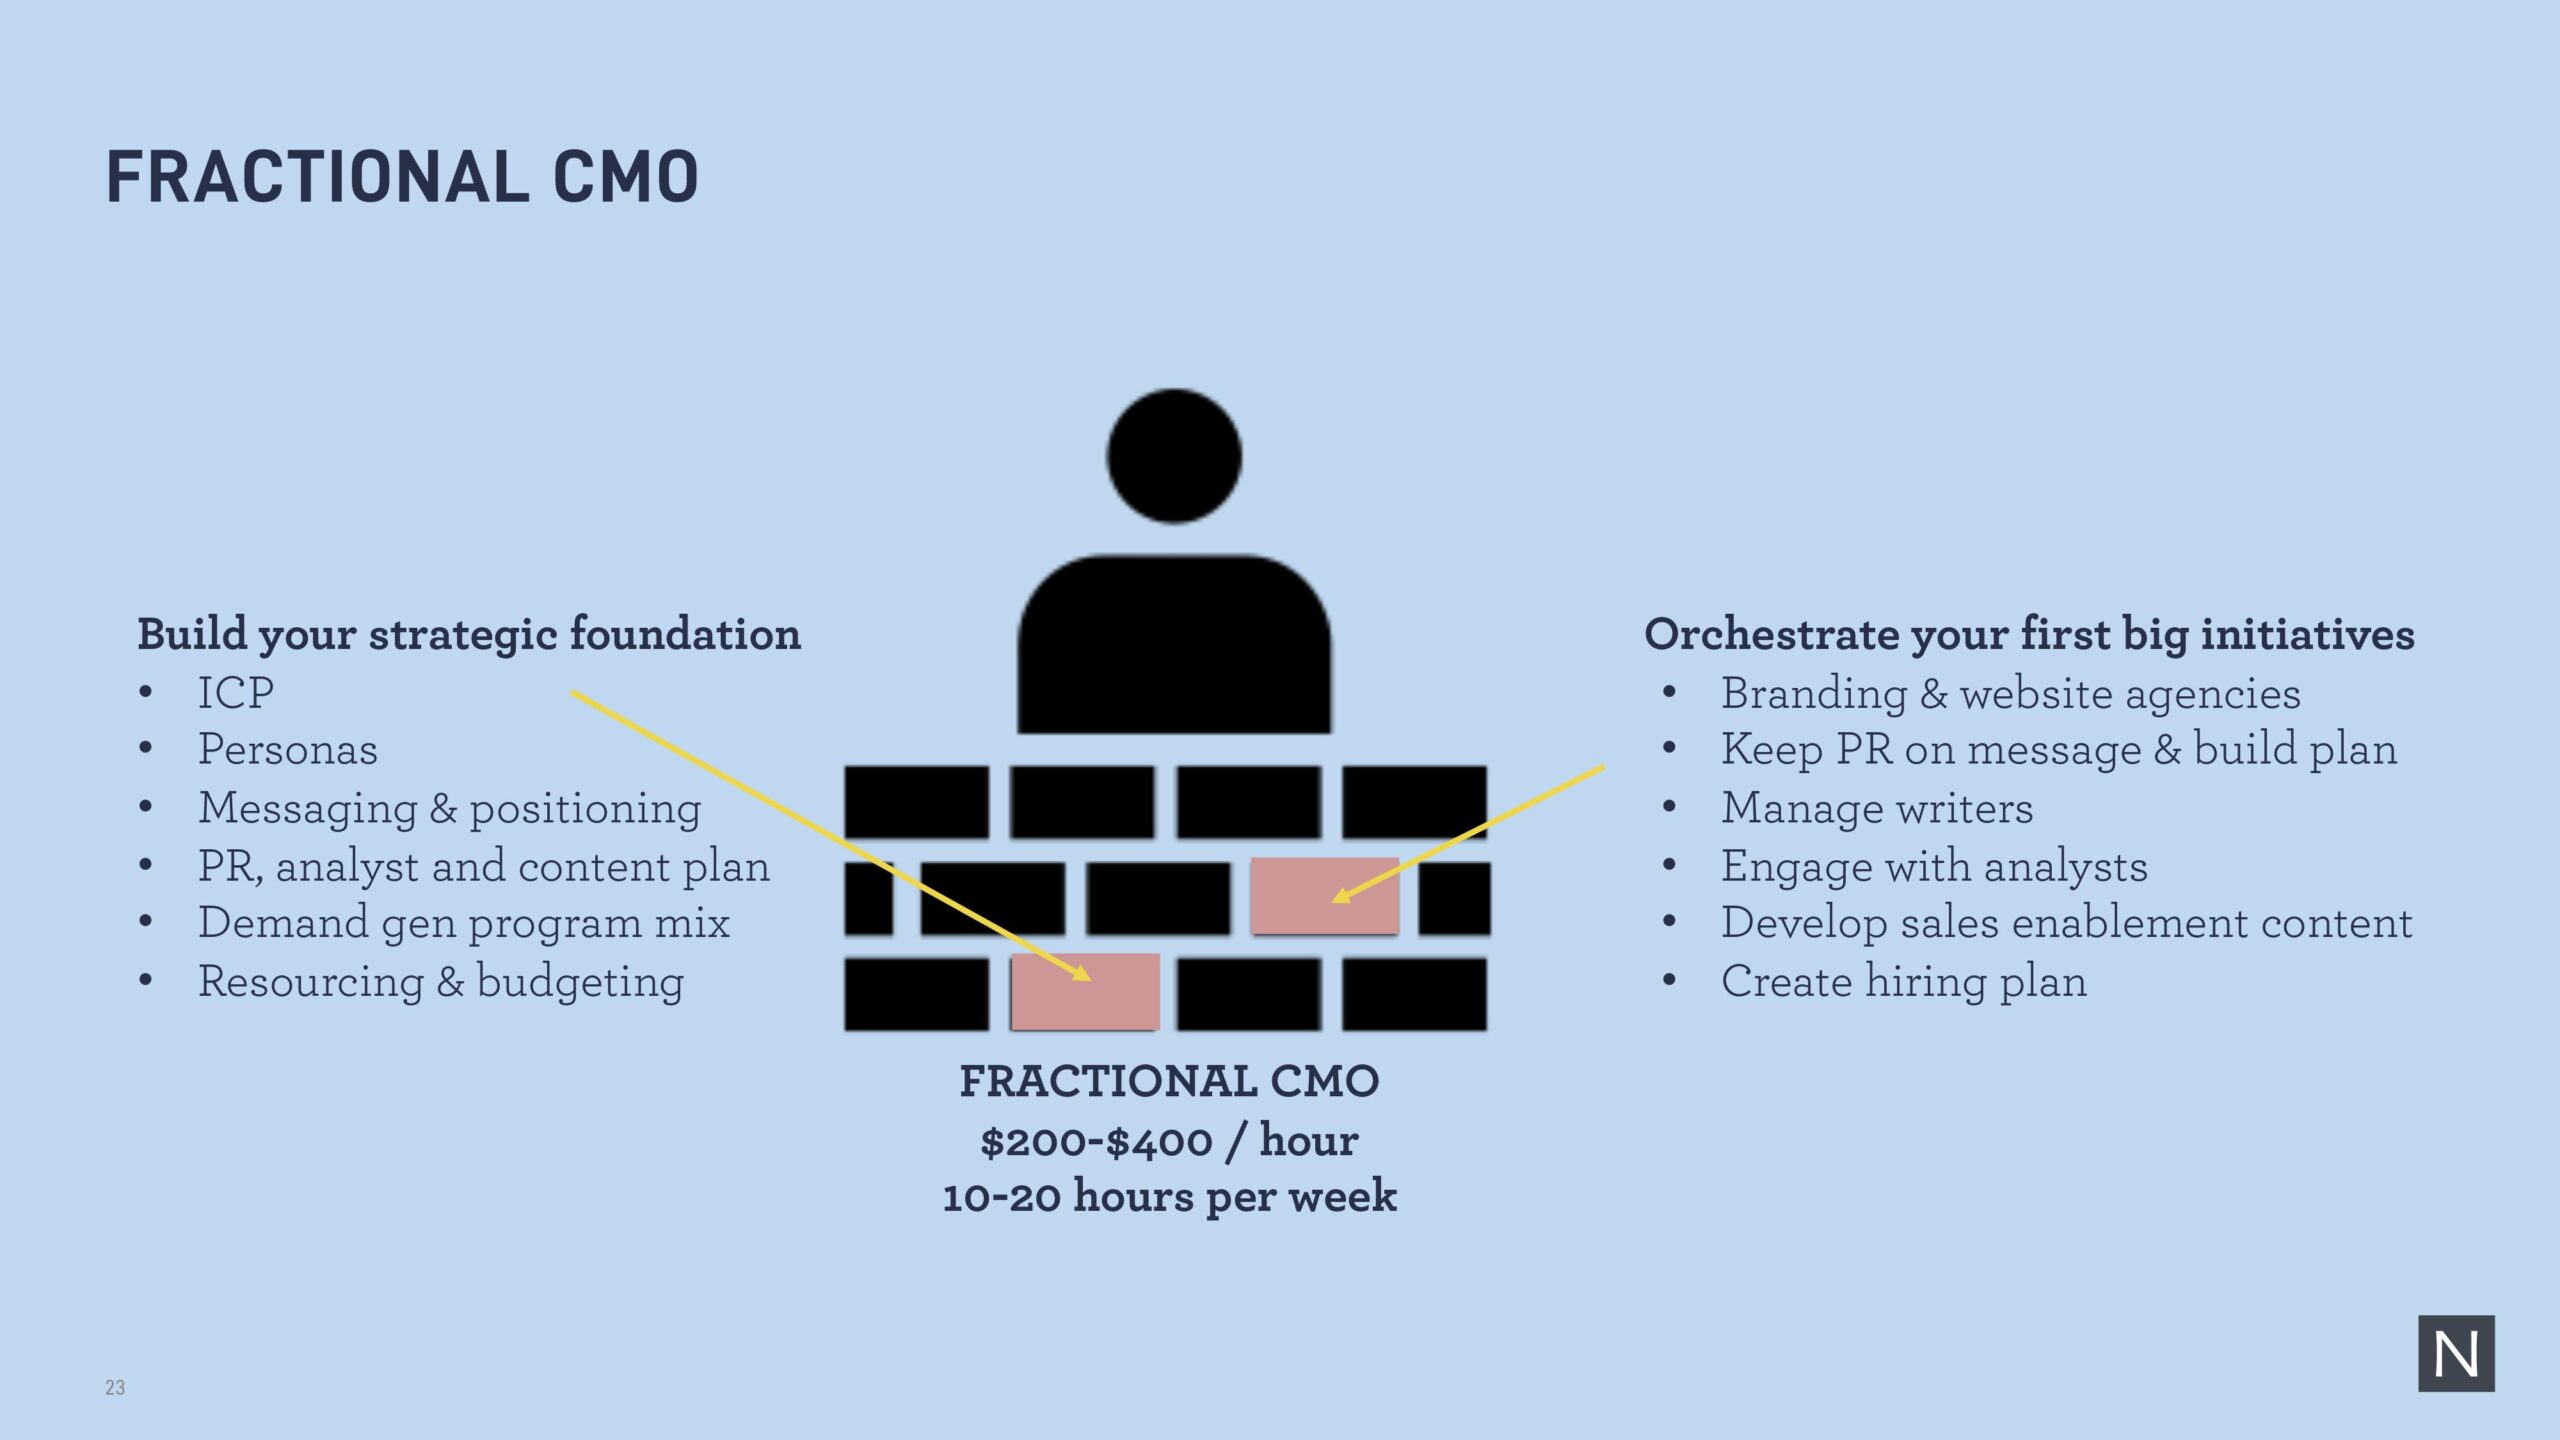 A fractional CMO is useful to get experienced help but on a pay-as-you-go basis depending on what you need. 